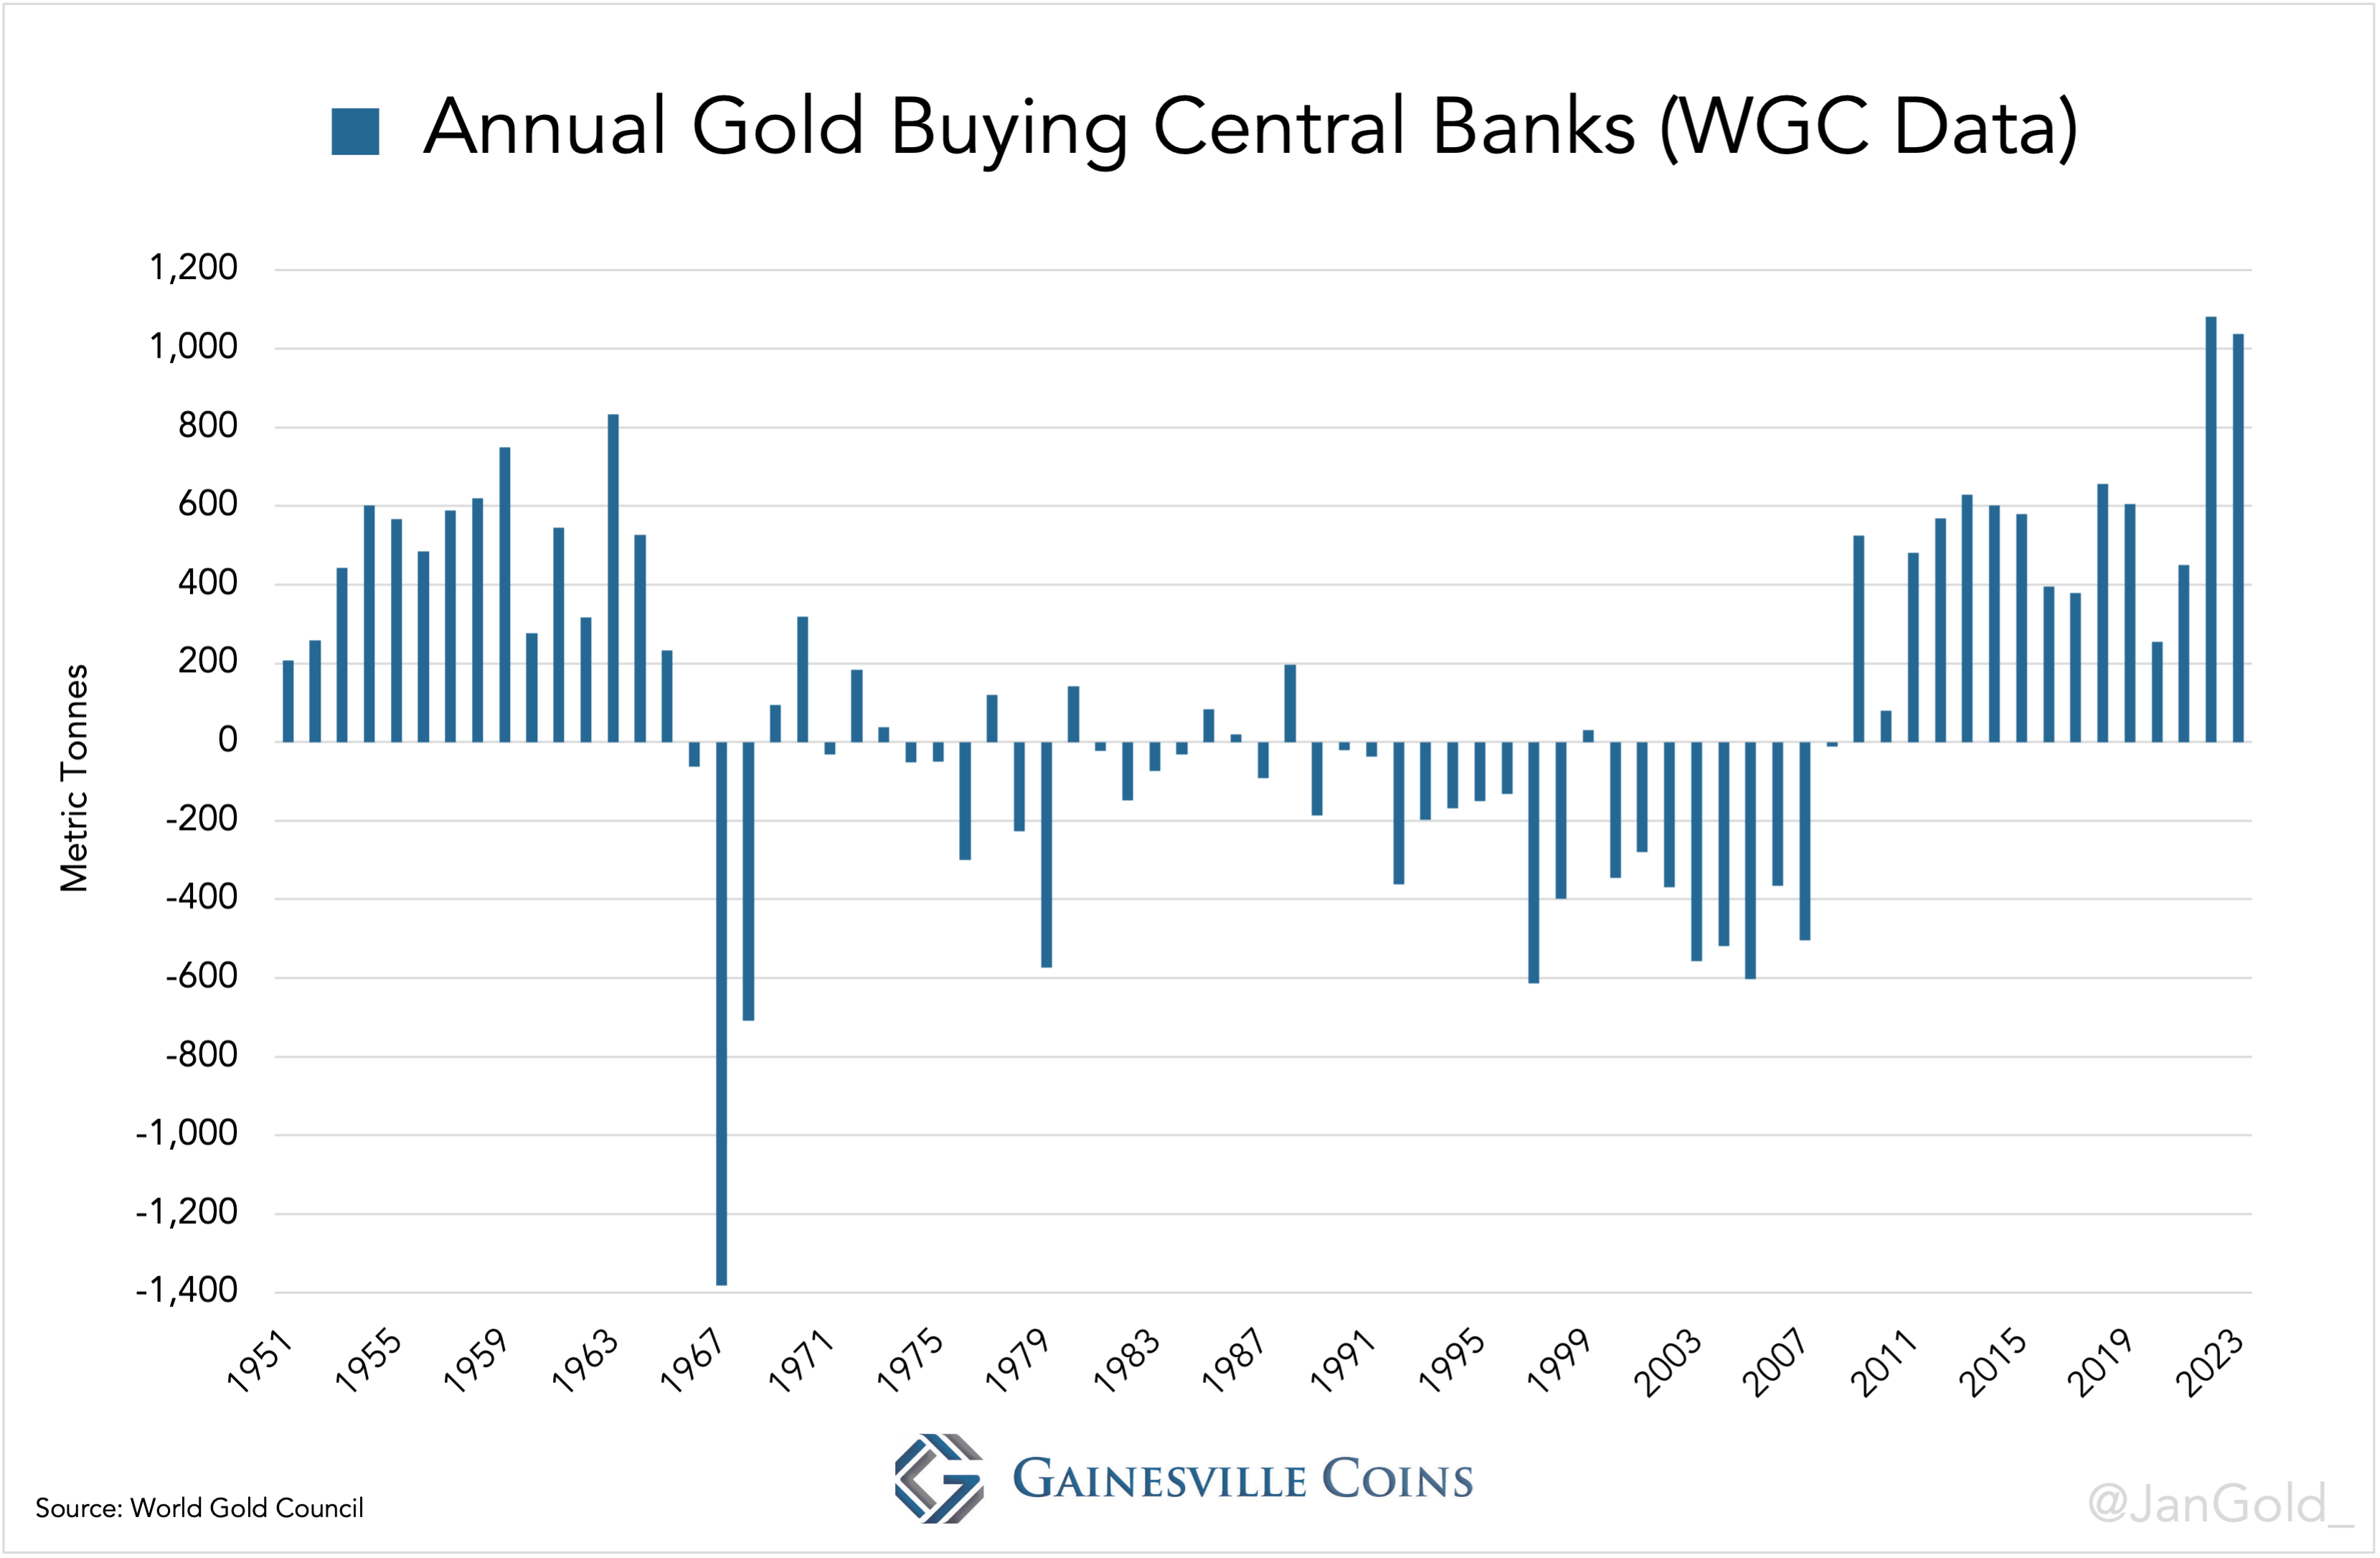 Annual Gold Buying Central Banks (WGC Data)